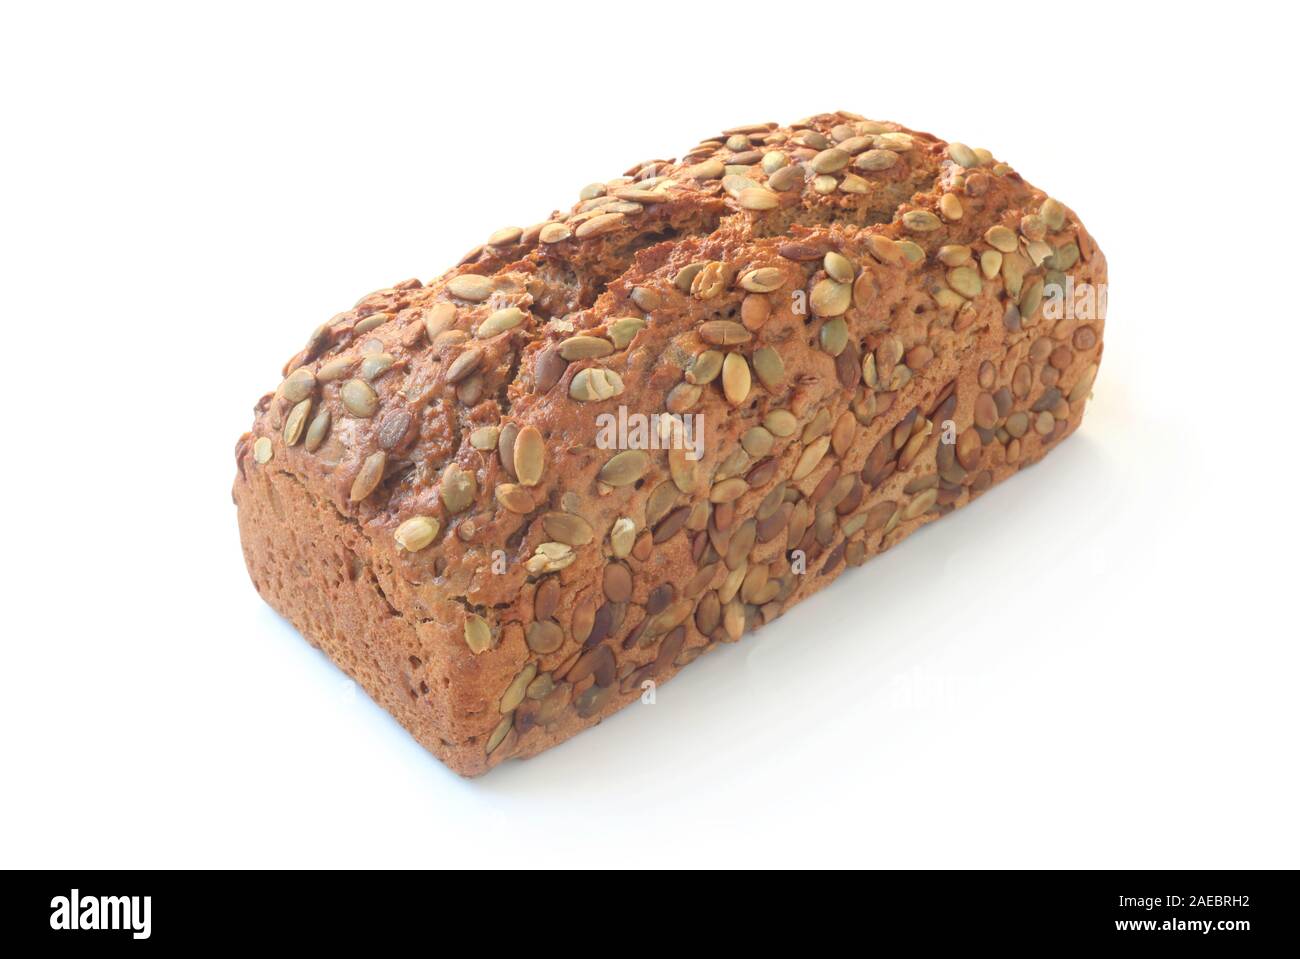 A Loaf Of Whole Grain Bread Isolated On White Stock Photo